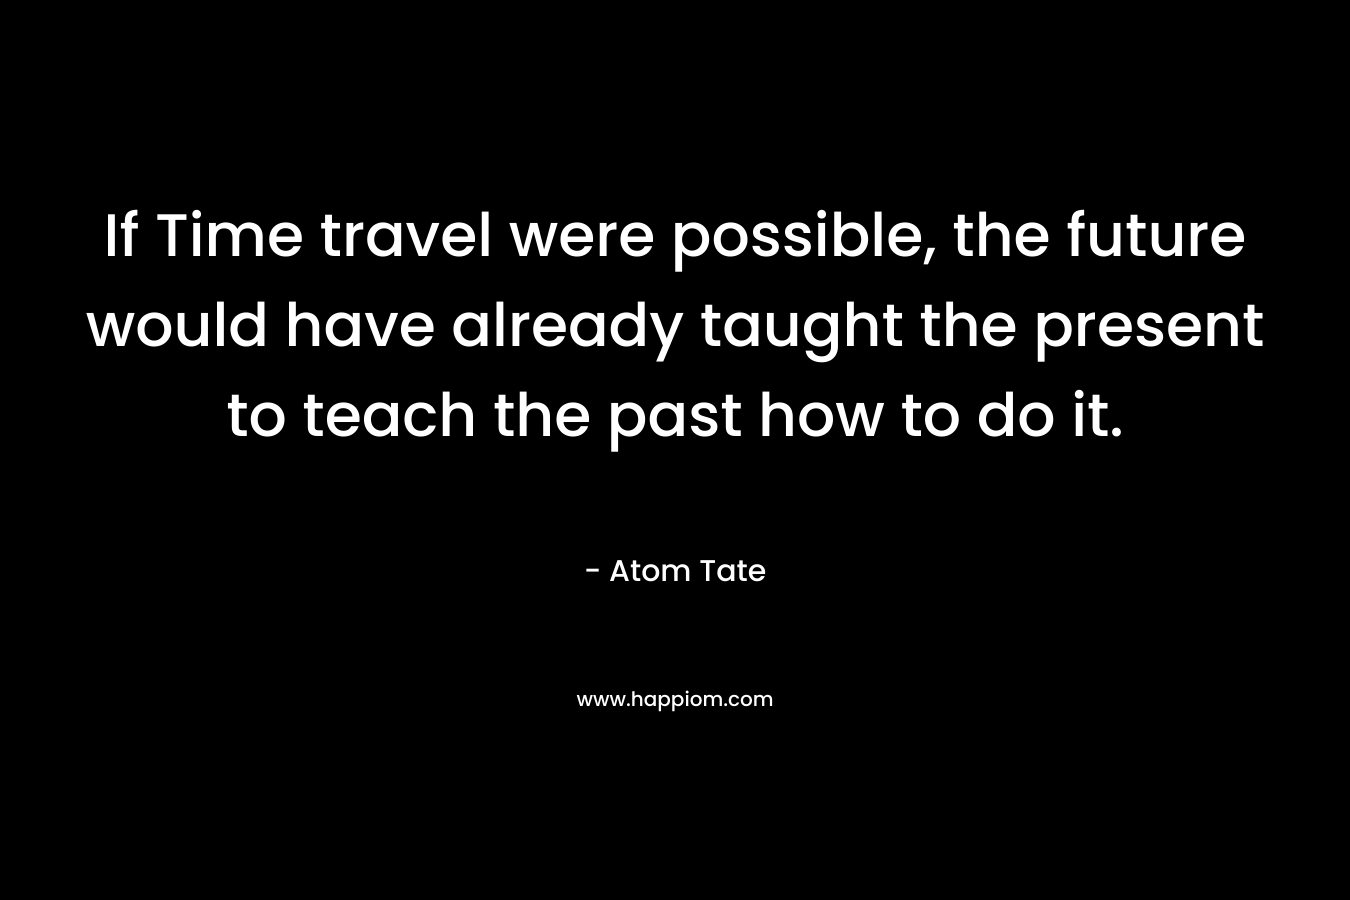 If Time travel were possible, the future would have already taught the present to teach the past how to do it.